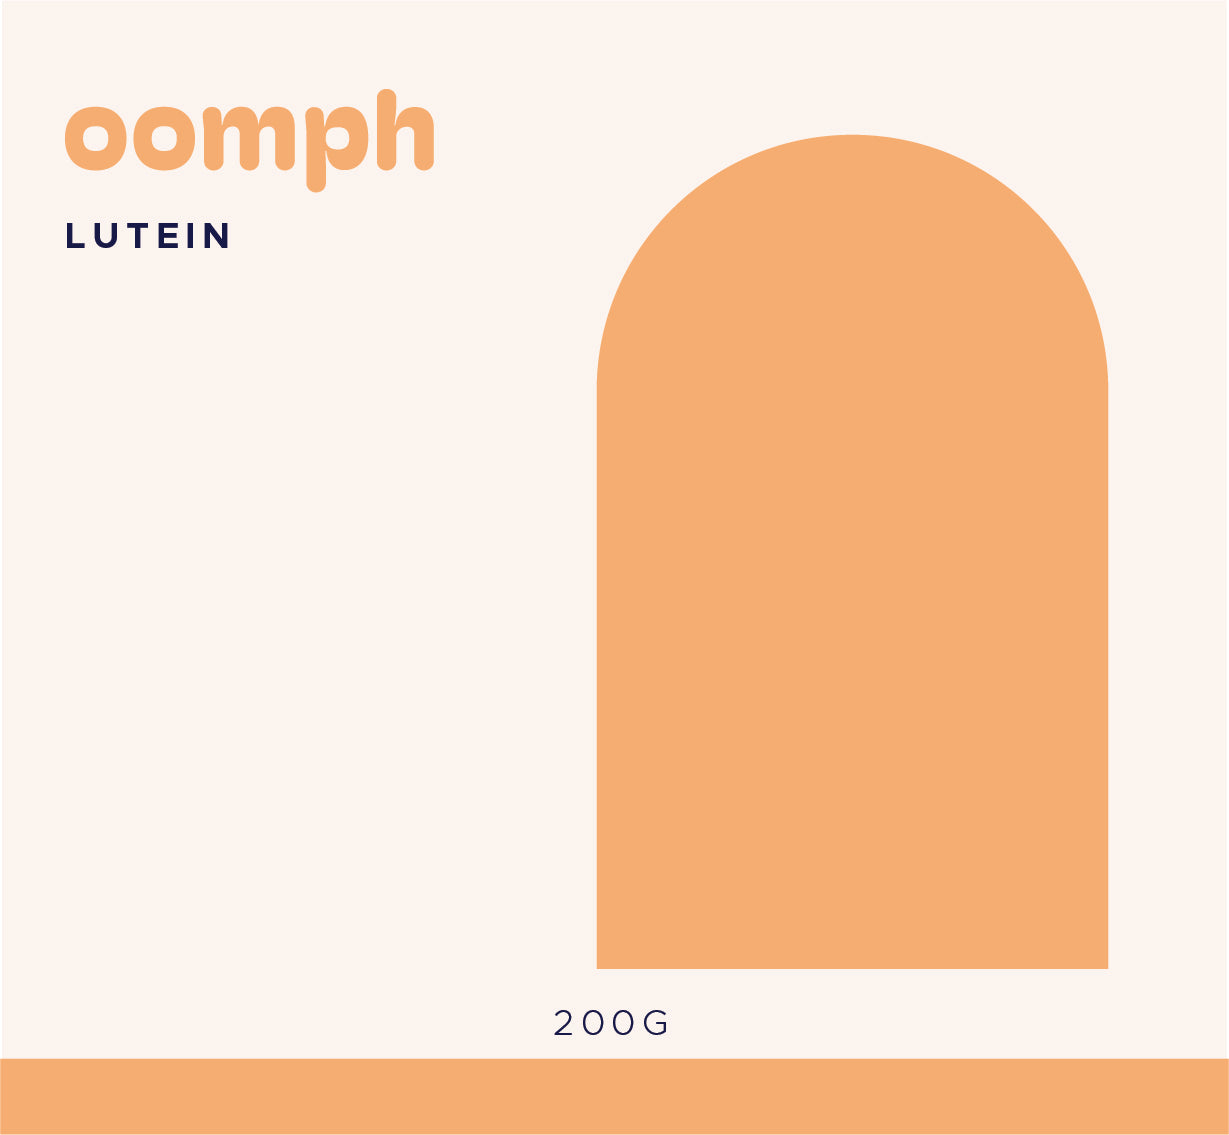 OOMPH Lutein (Marigold Extract) 200g